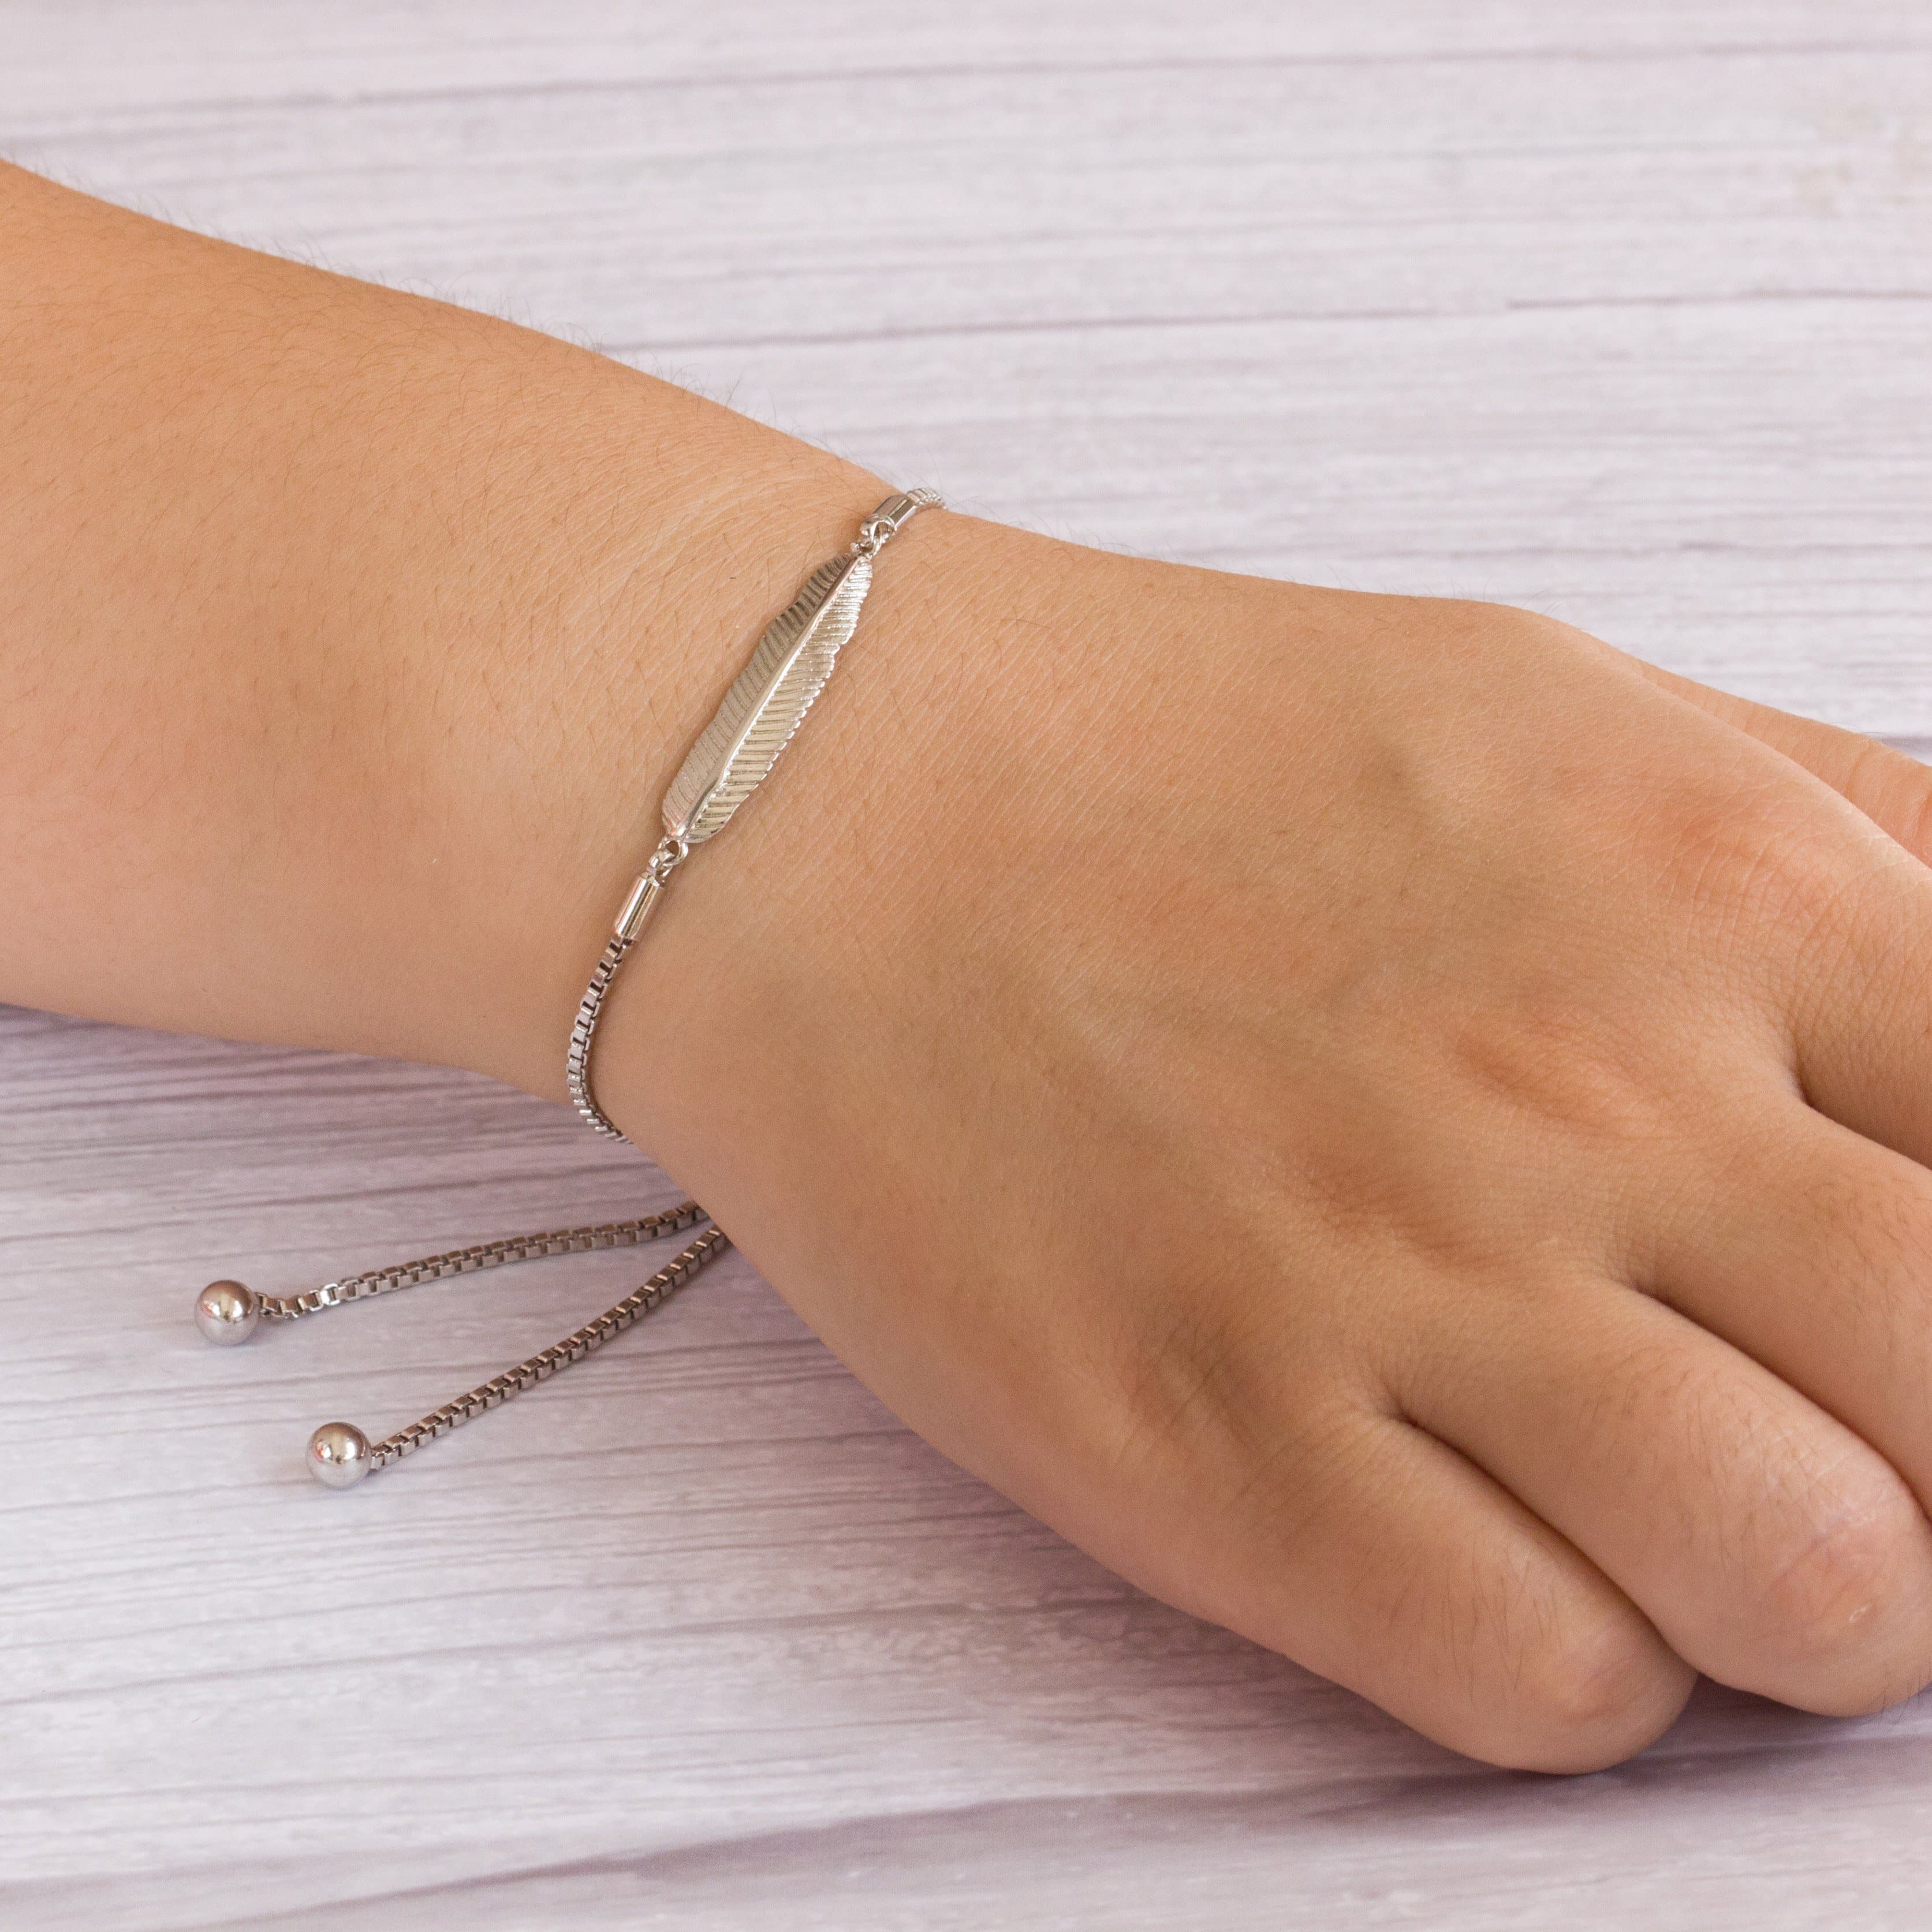 Silver Plated Feather Friendship Bracelet Created with Zircondia® Crystals